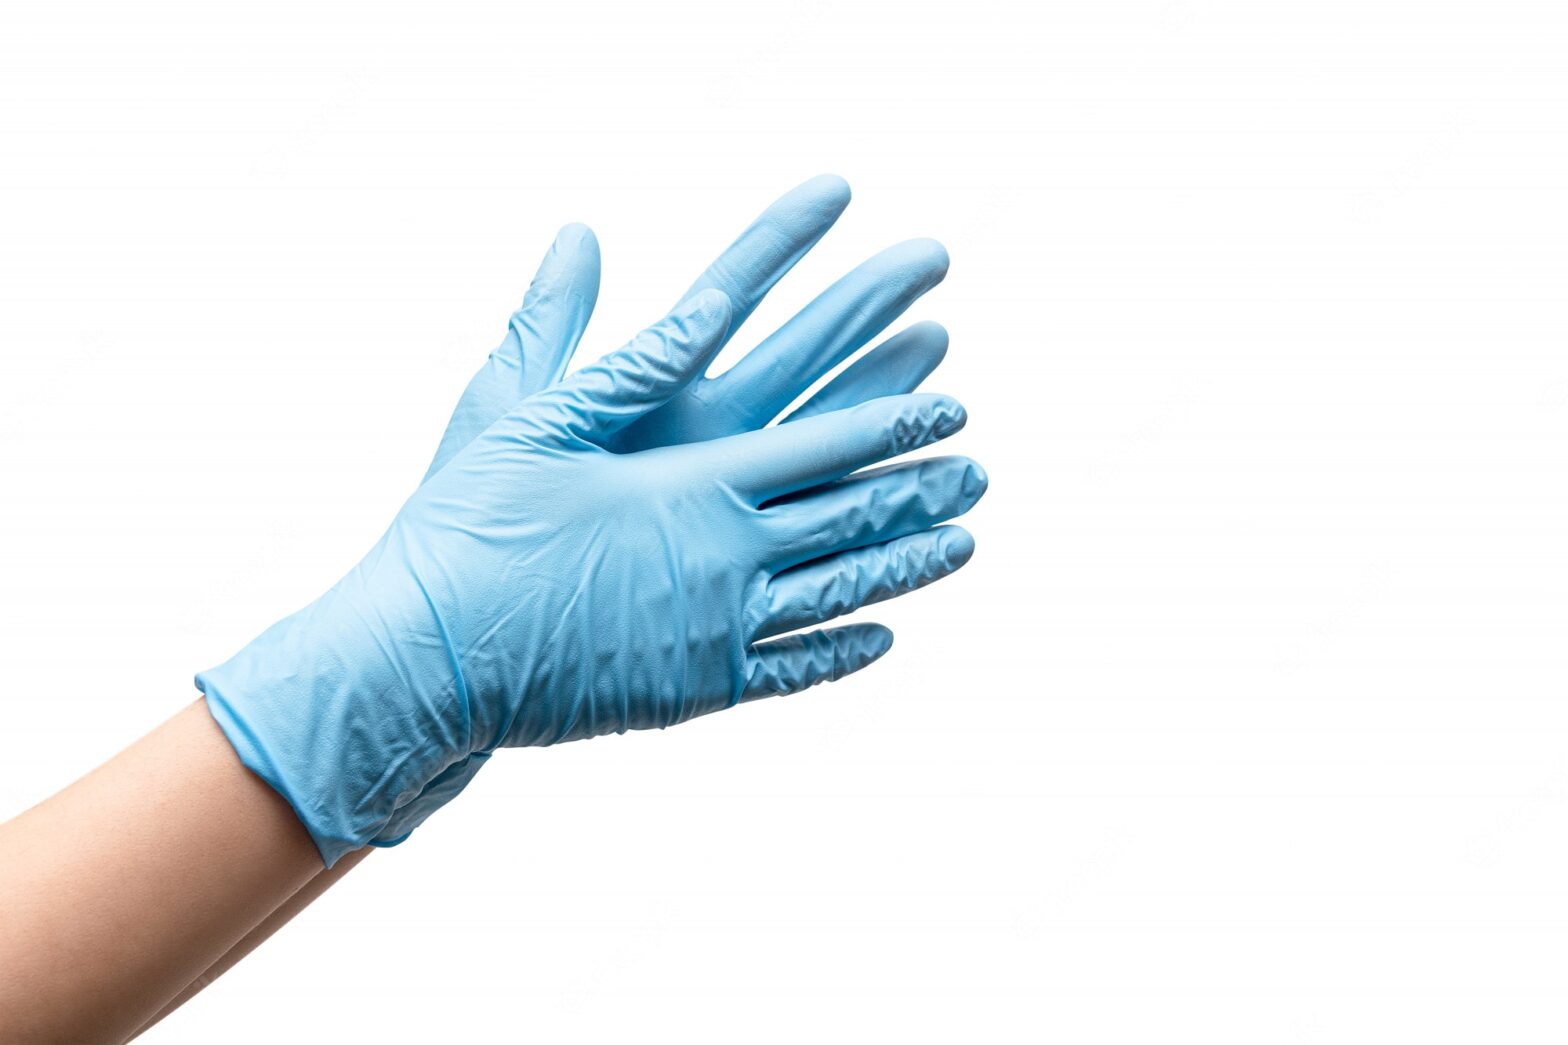 Ask yourself these questions before buying nitrile gloves